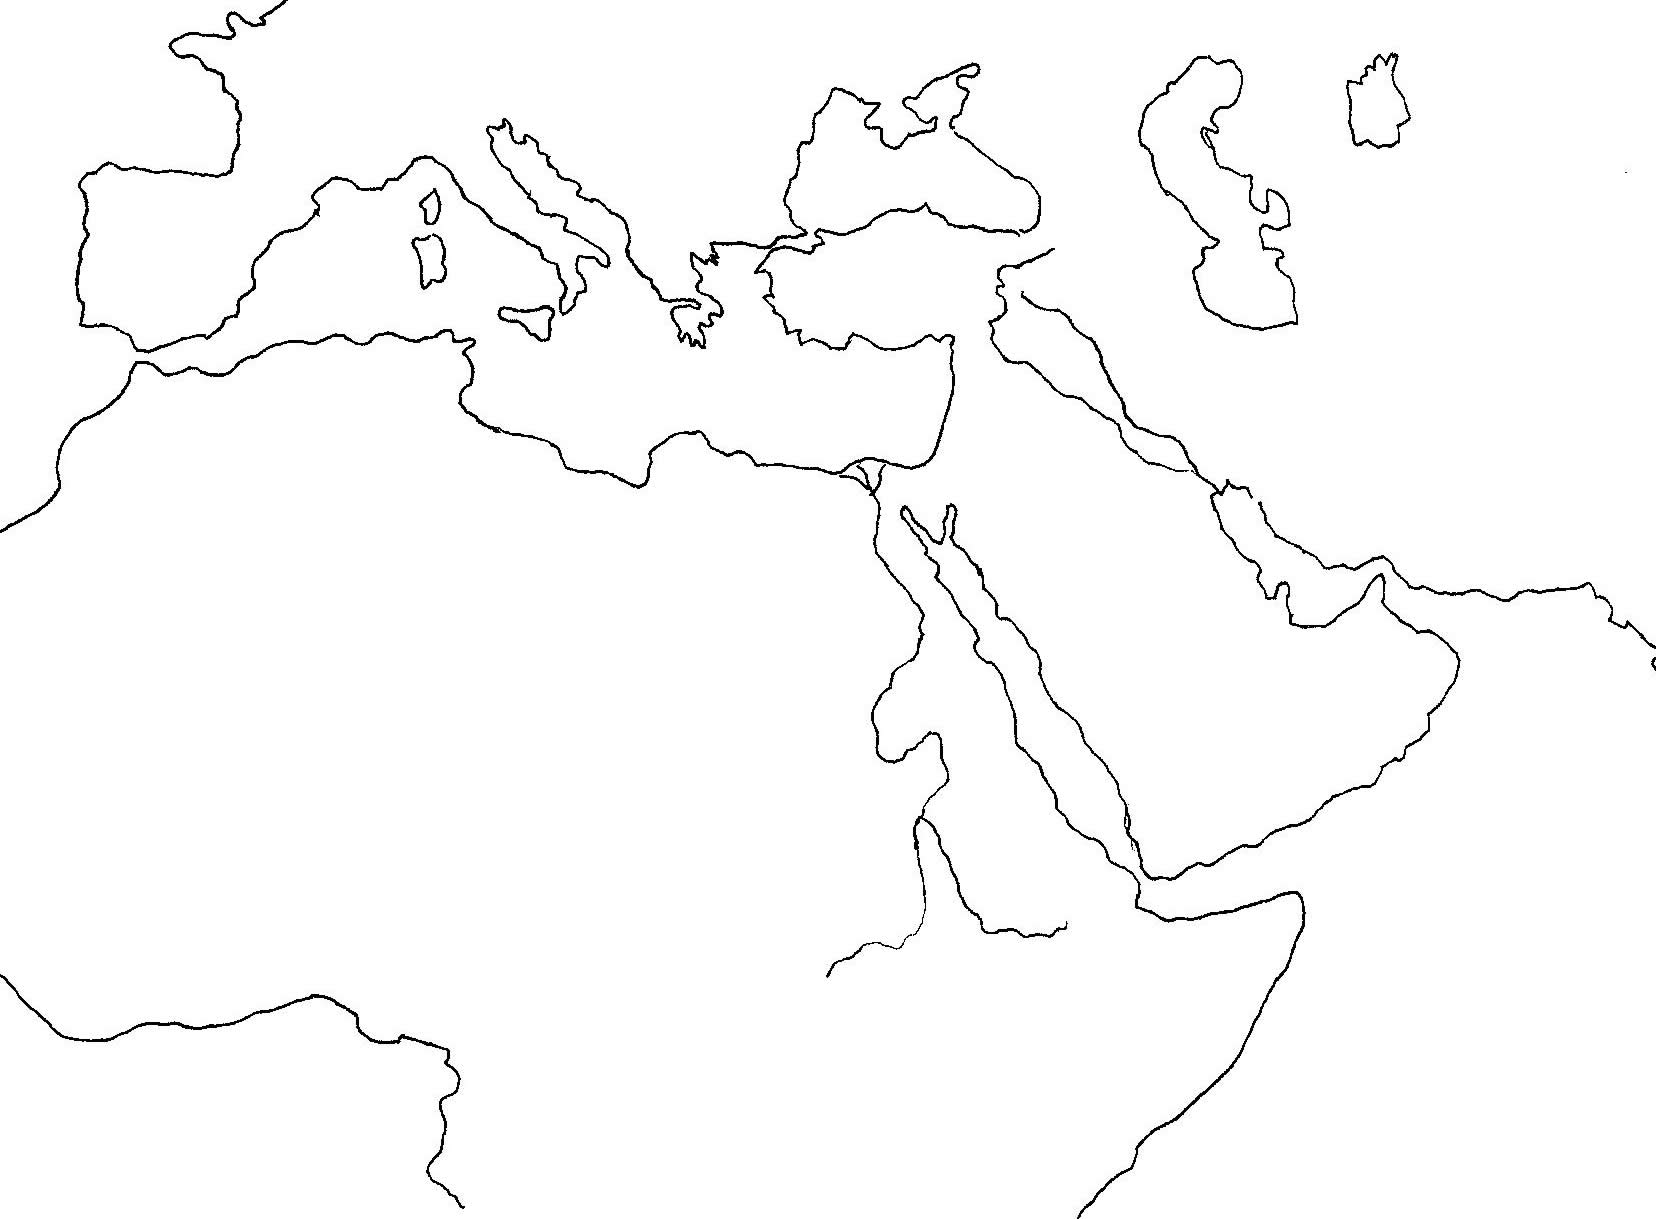 blank map of asia and africa Map Of Africa Blank Map Of Europe Asia And Africa blank map of asia and africa